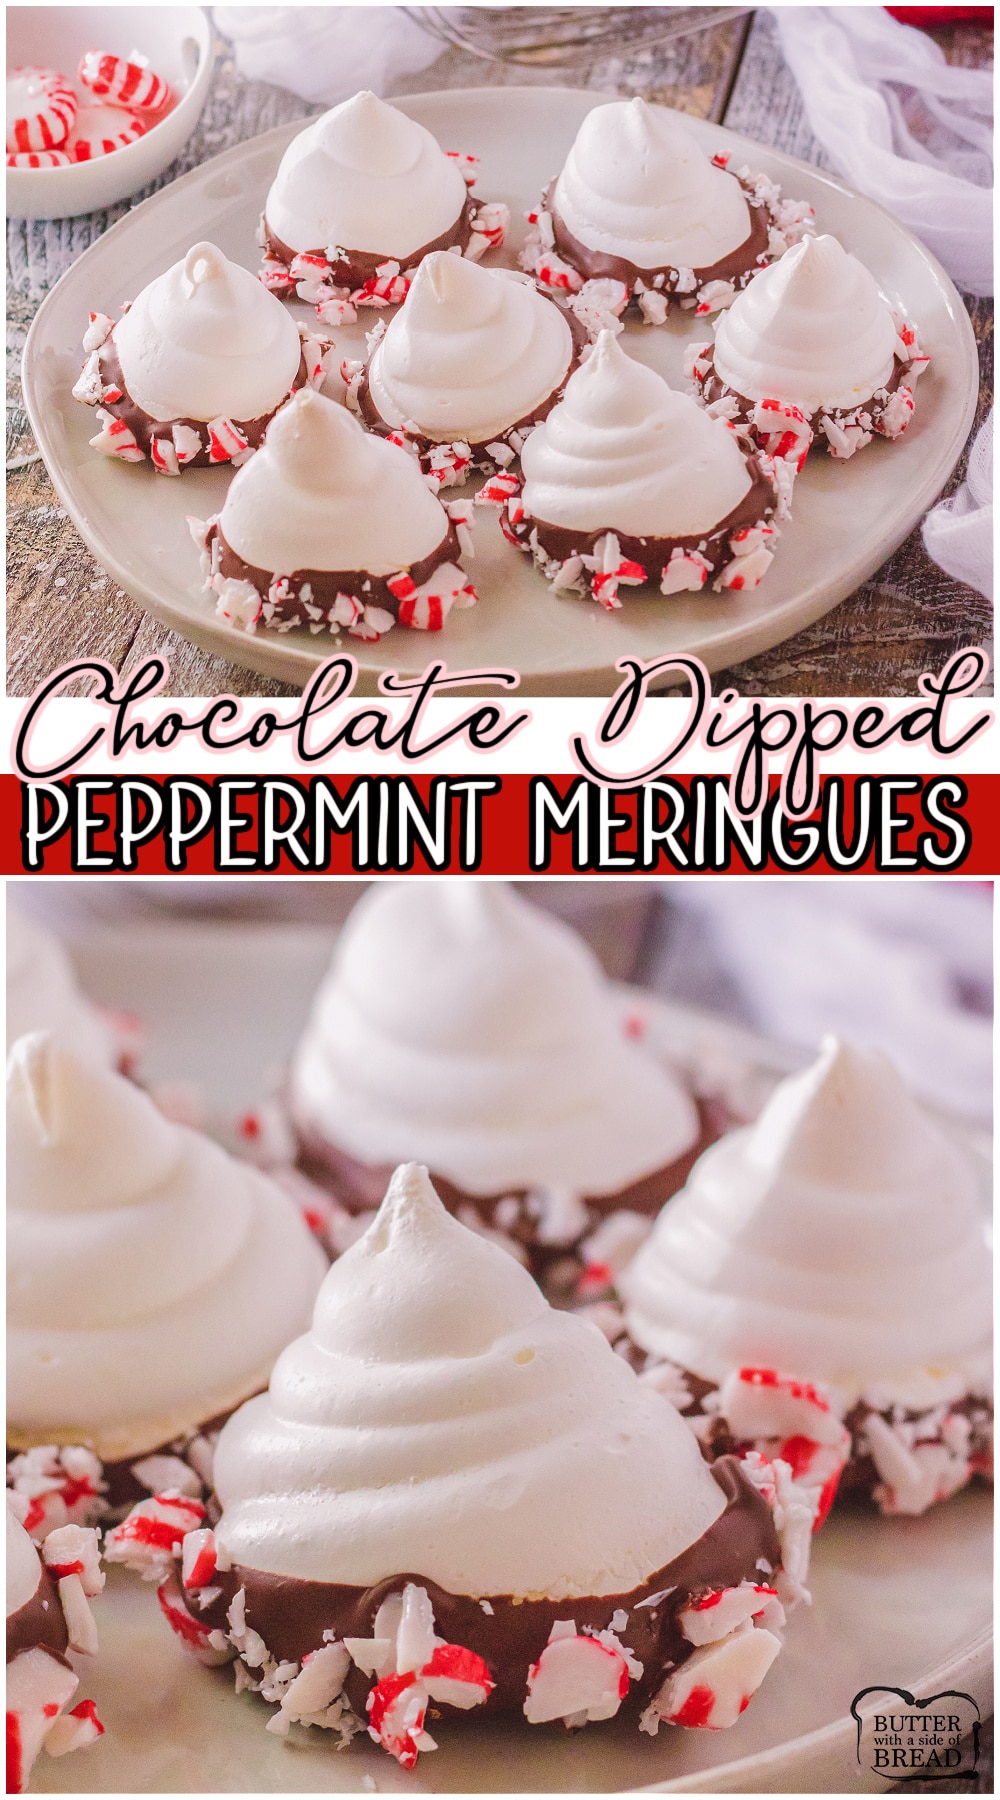 Chocolate Dipped Peppermint Meringues made with egg whites, sugar & peppermint extract for an enjoyable cookie that's both low fat & low cal! Meringues are so easy to make & the chocolate peppermint addition is pure indulgence! 